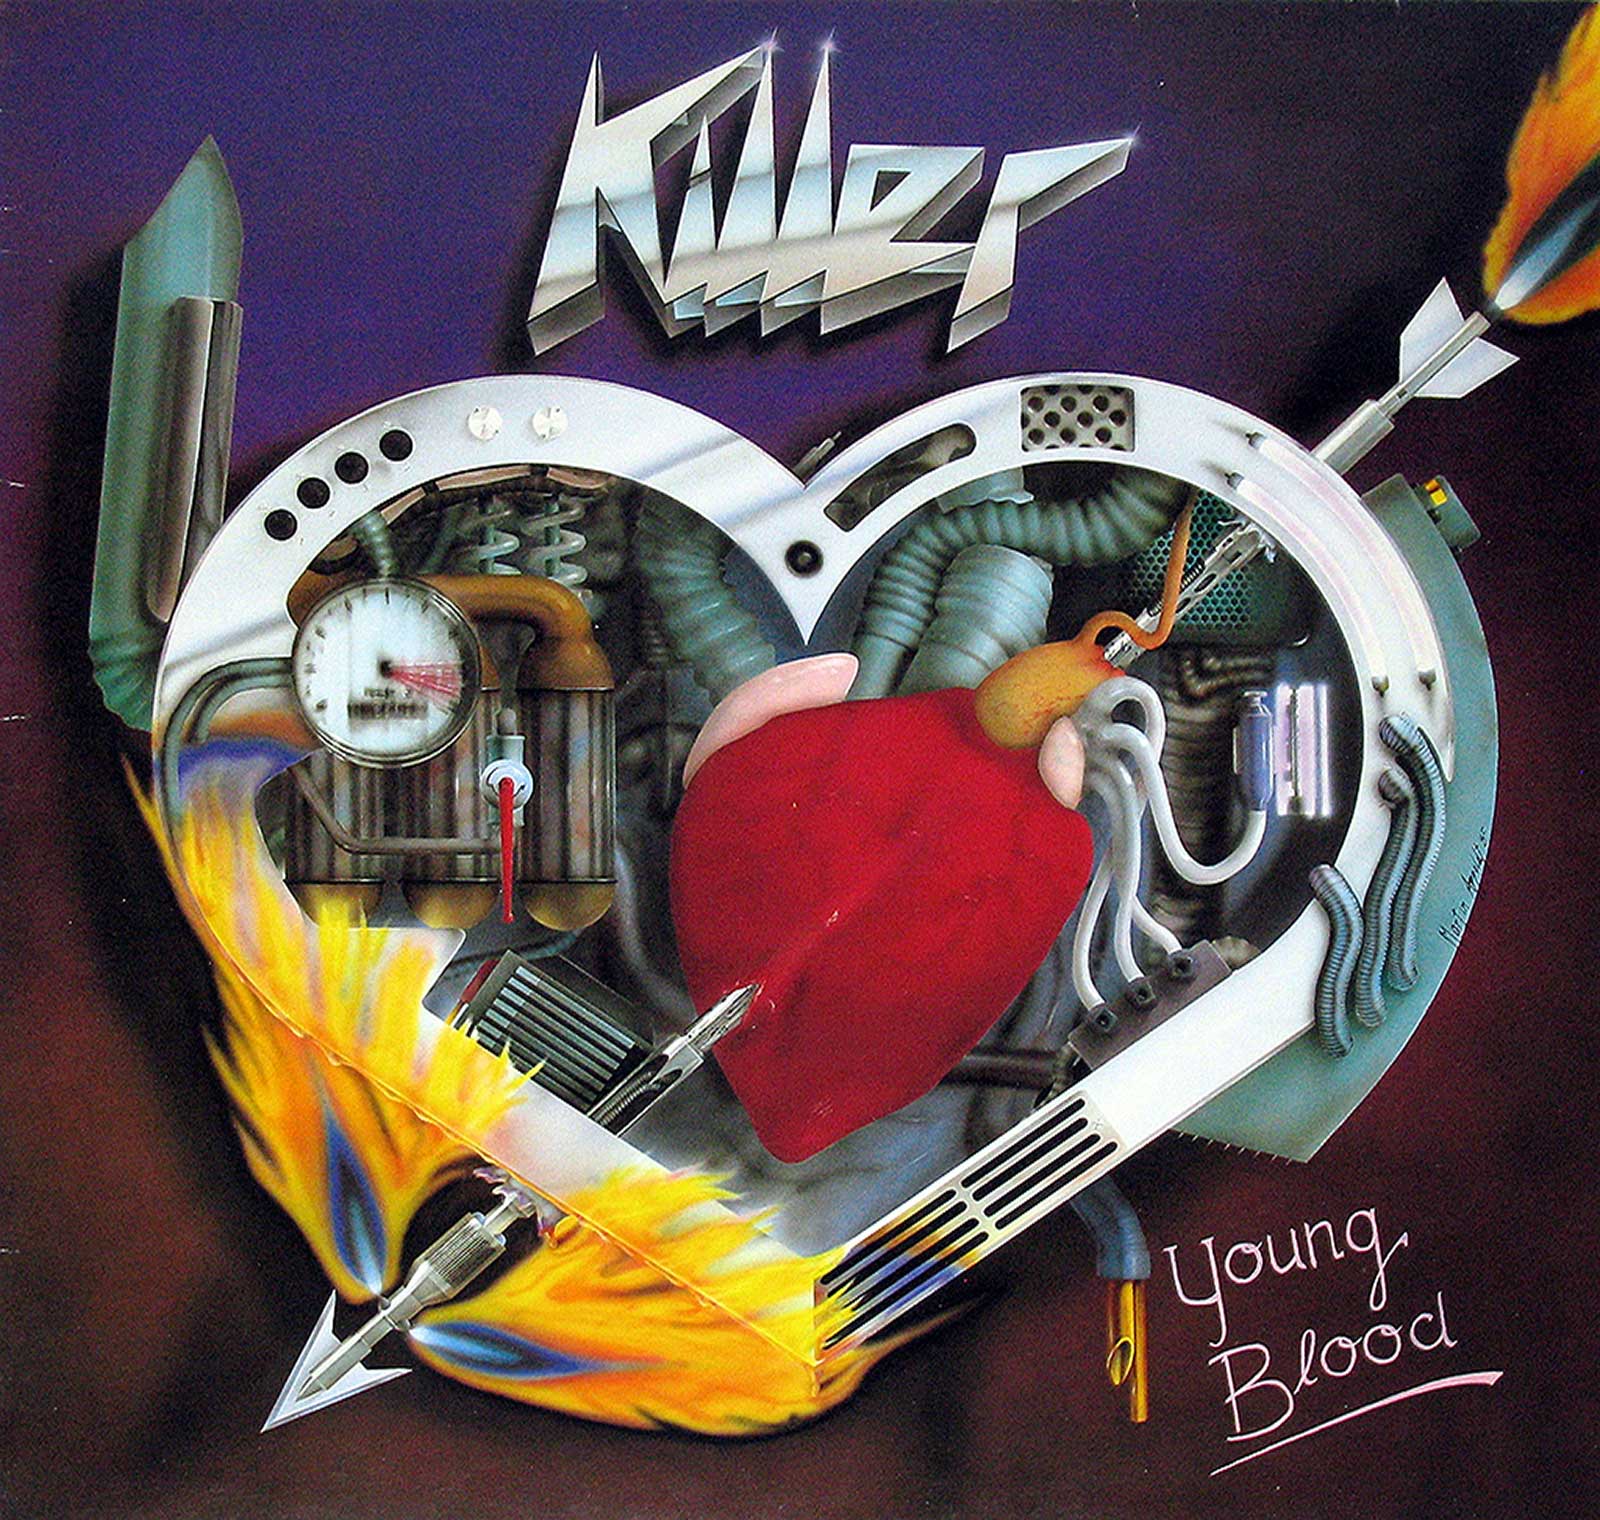 large album front cover photo of: Killer ( Switzerland ) - Young Blood 